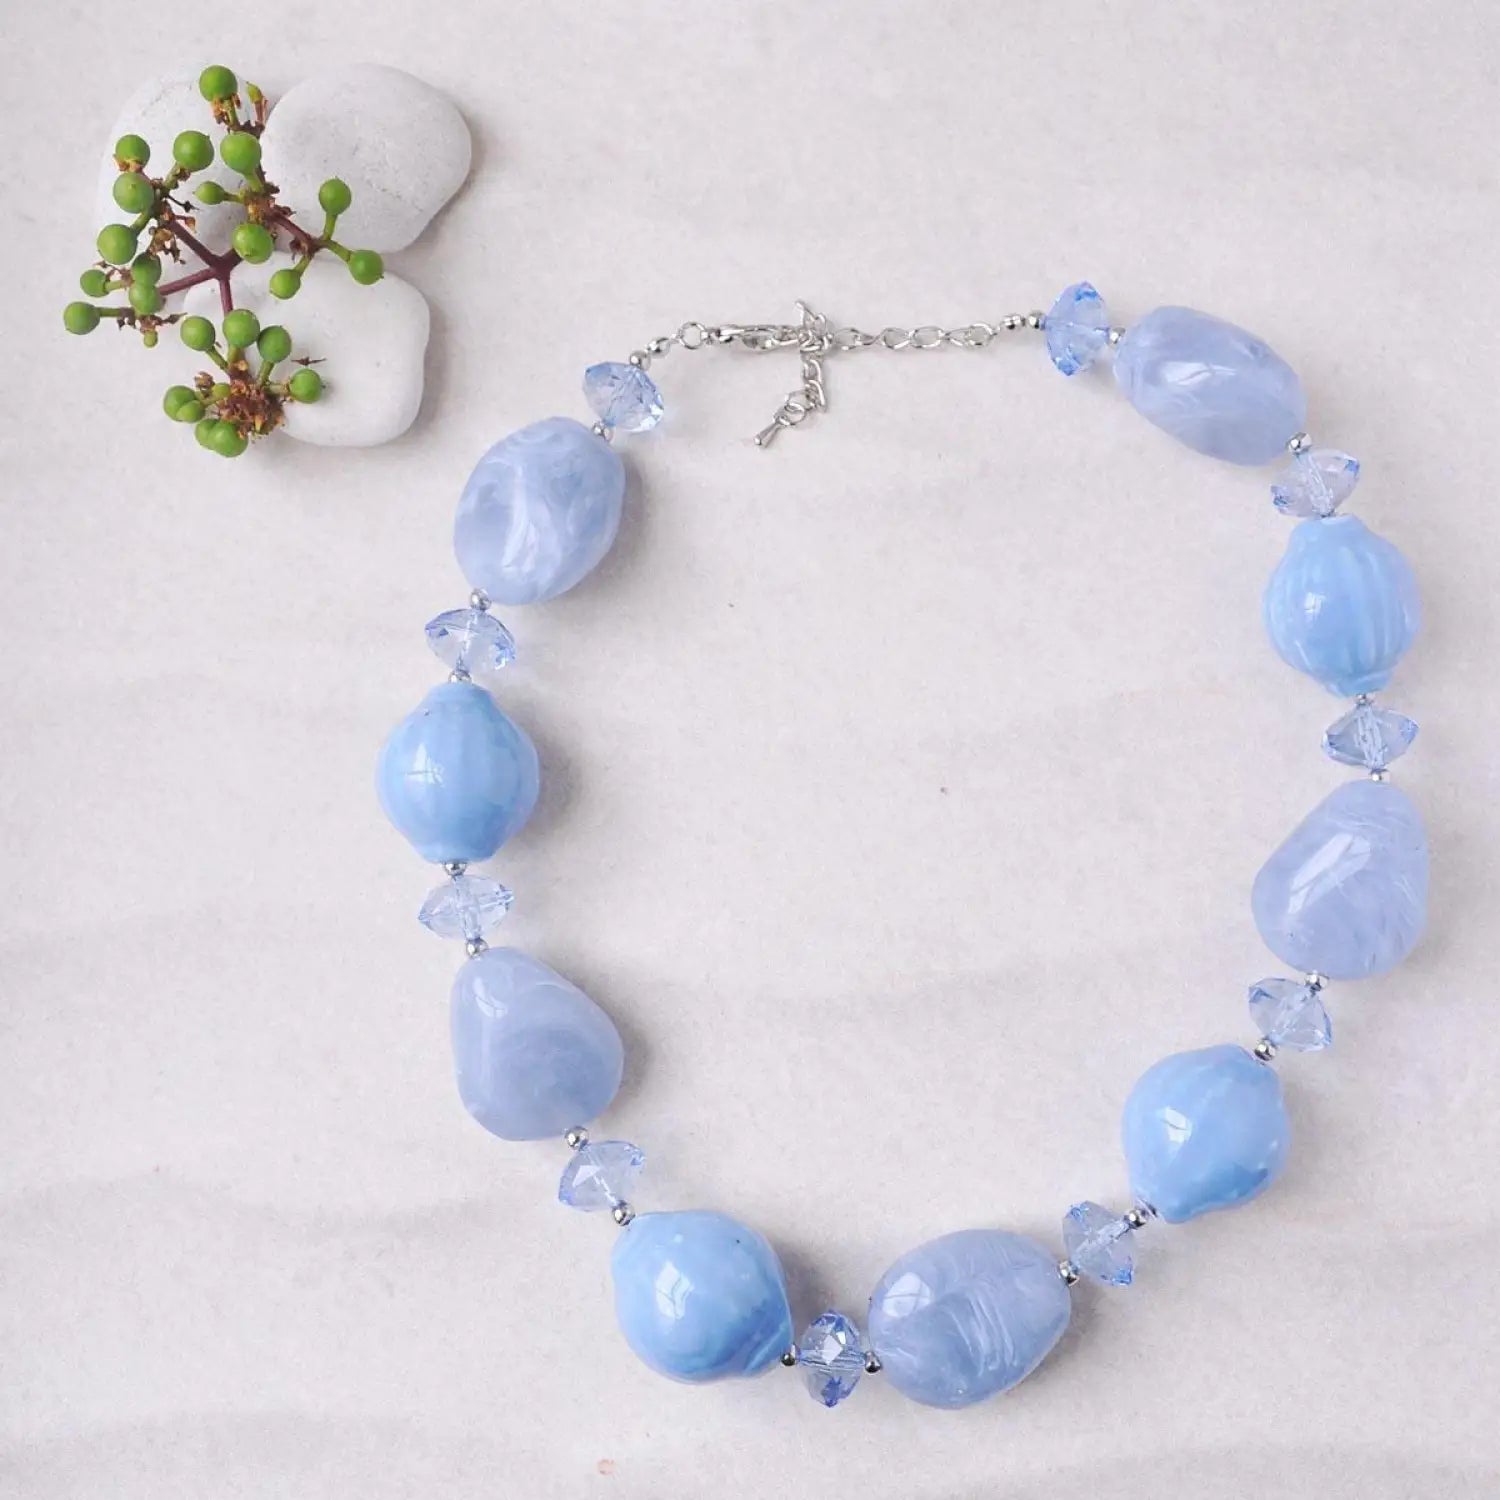 Chunky Beads Statement Necklace with Blue Beads and Flower